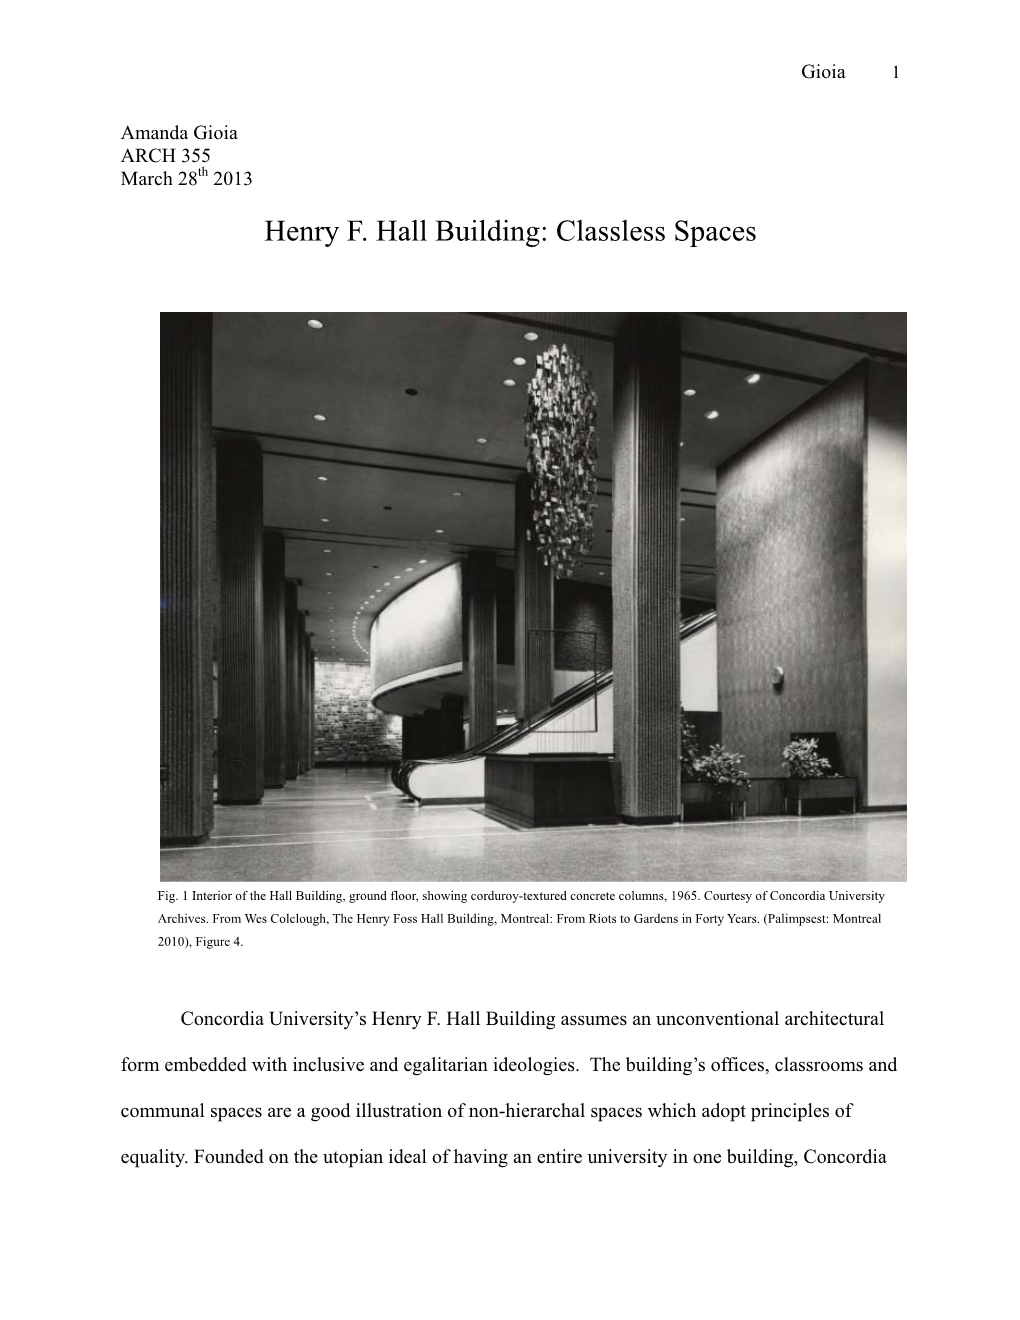 Henry F. Hall Building: Classless Spaces